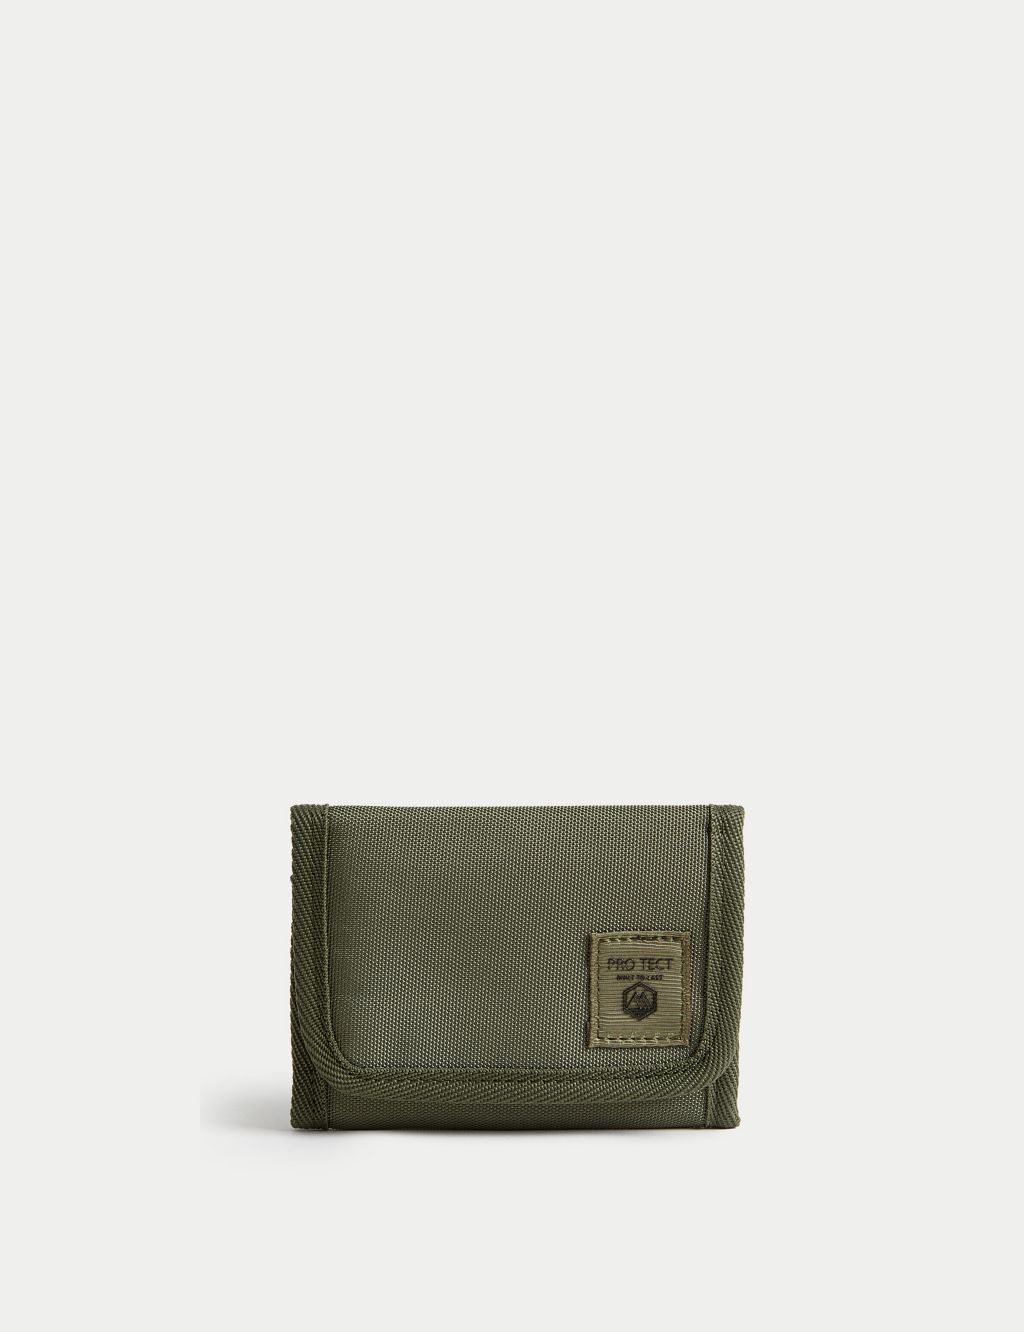 Recycled Polyester Pro-Tect™ Bi-fold Wallet